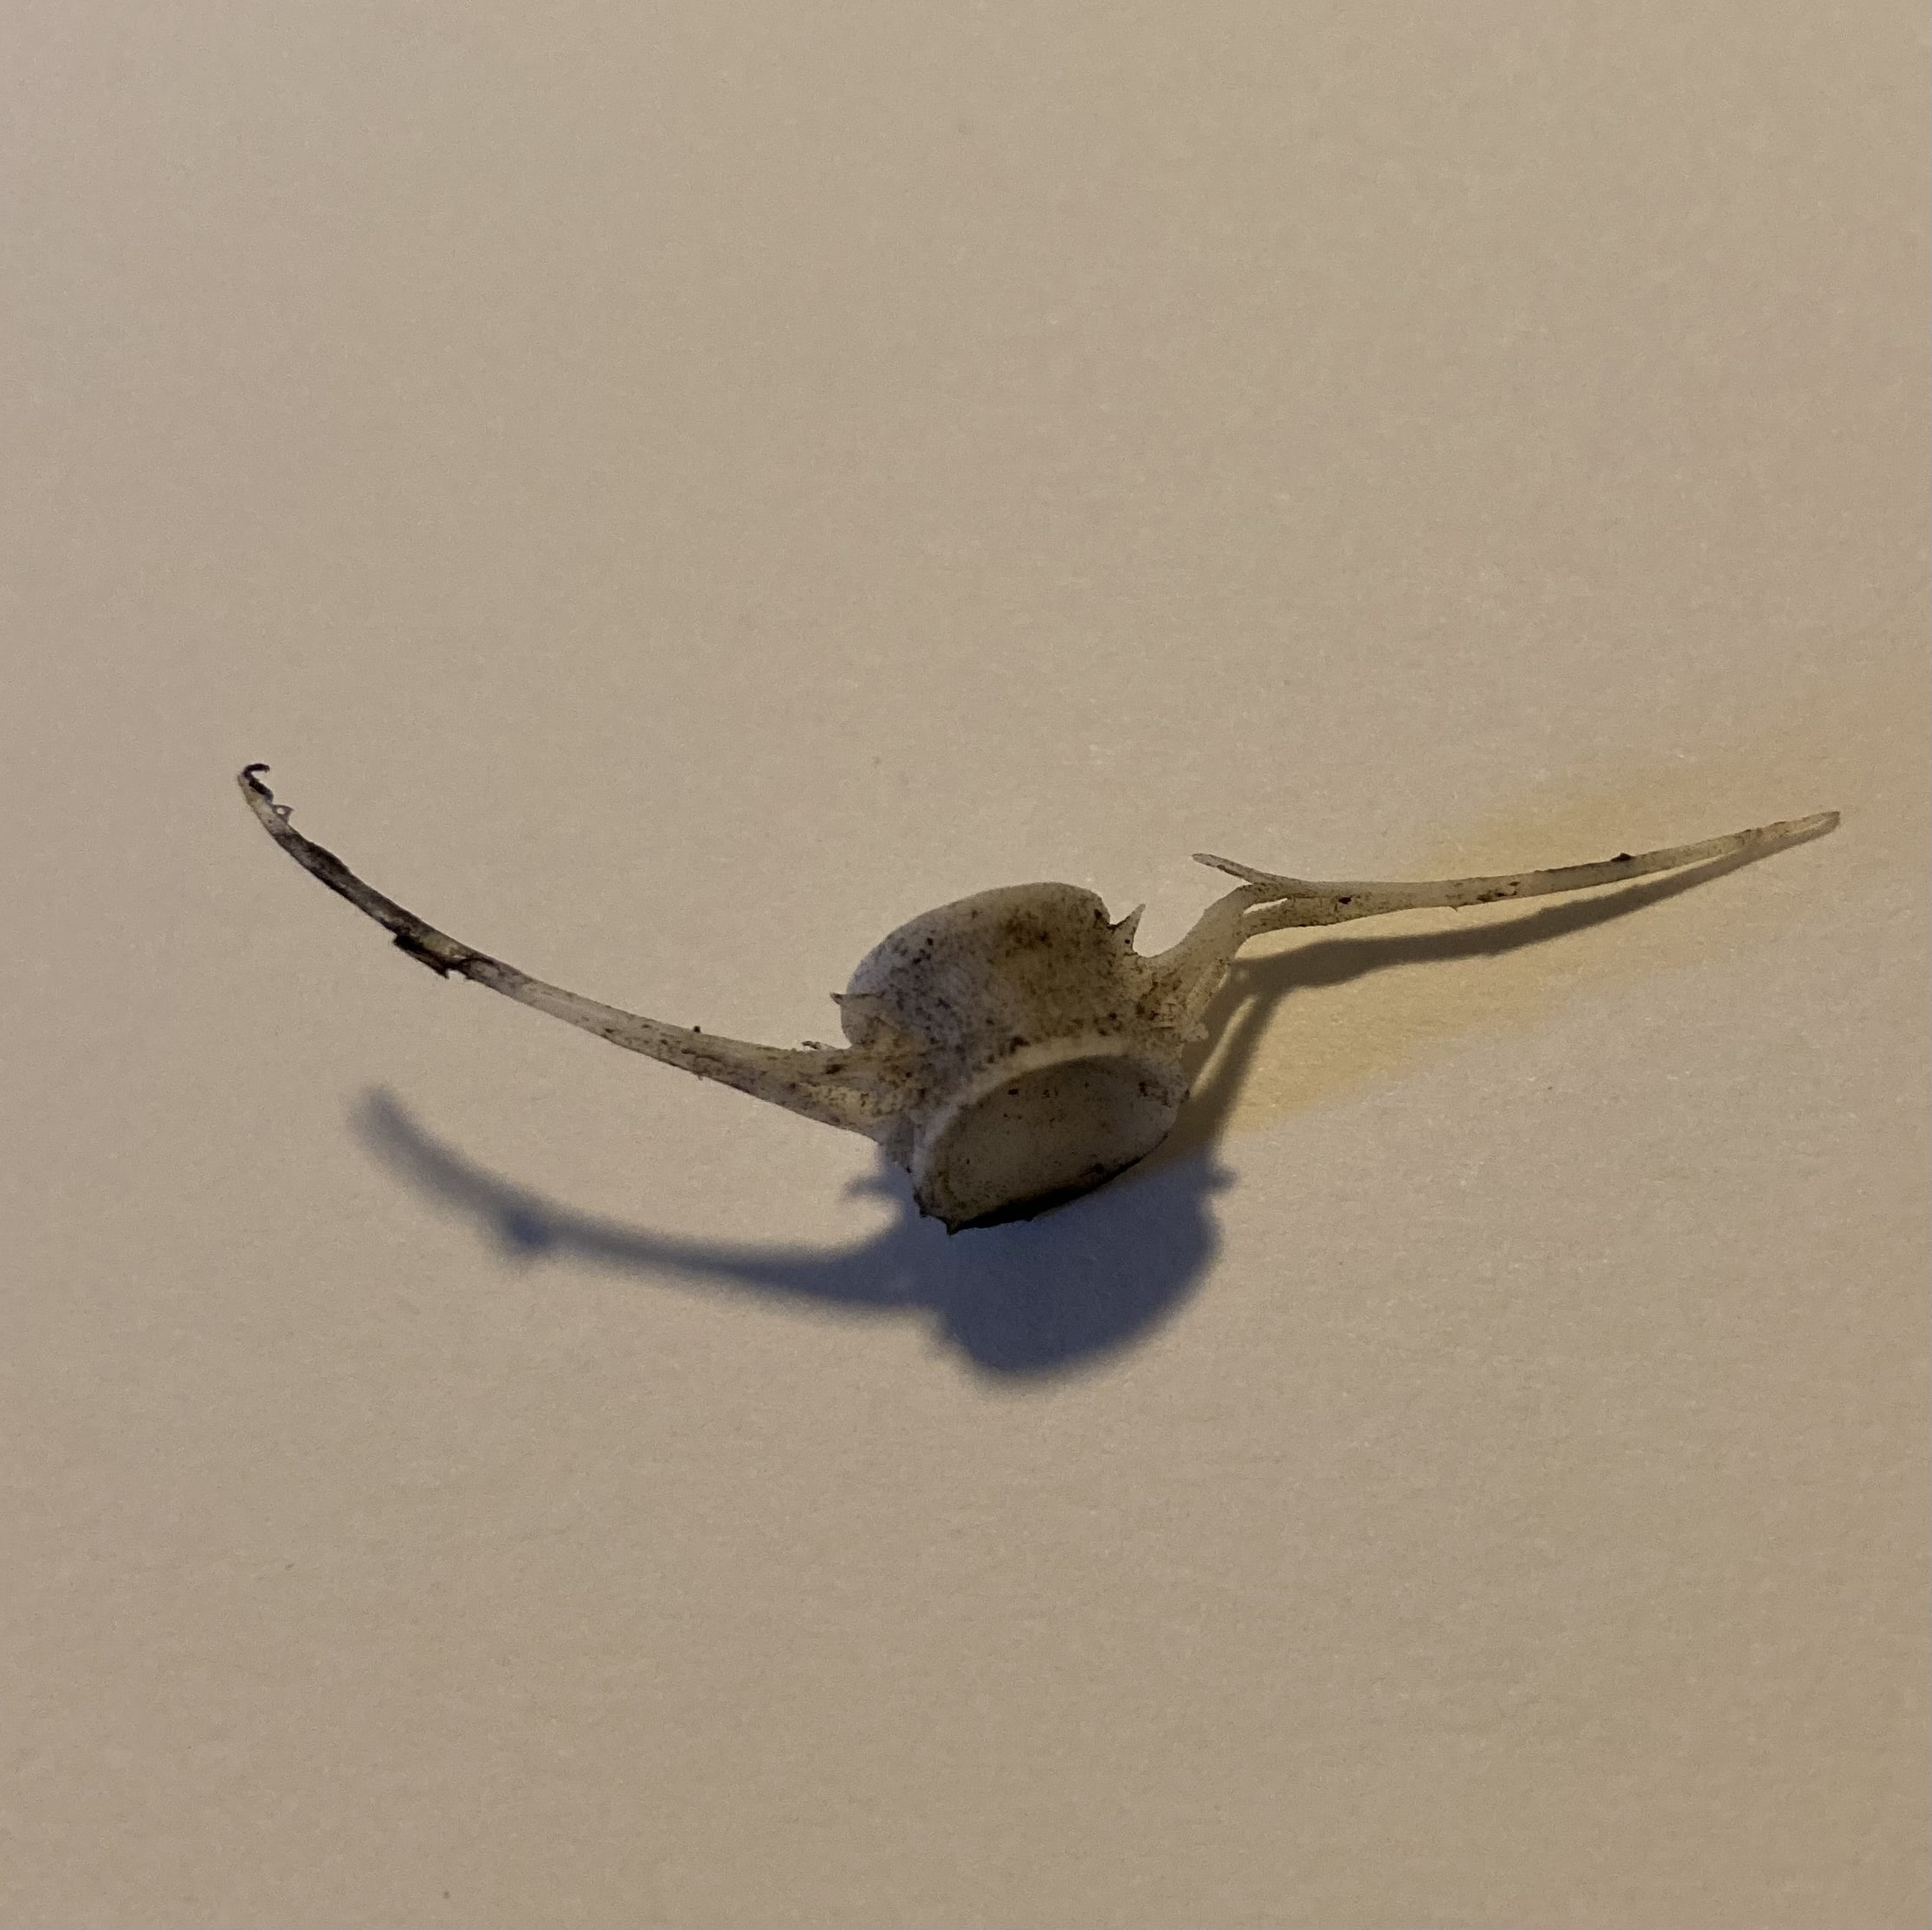 small vertebrae with tiny rips poking off of it